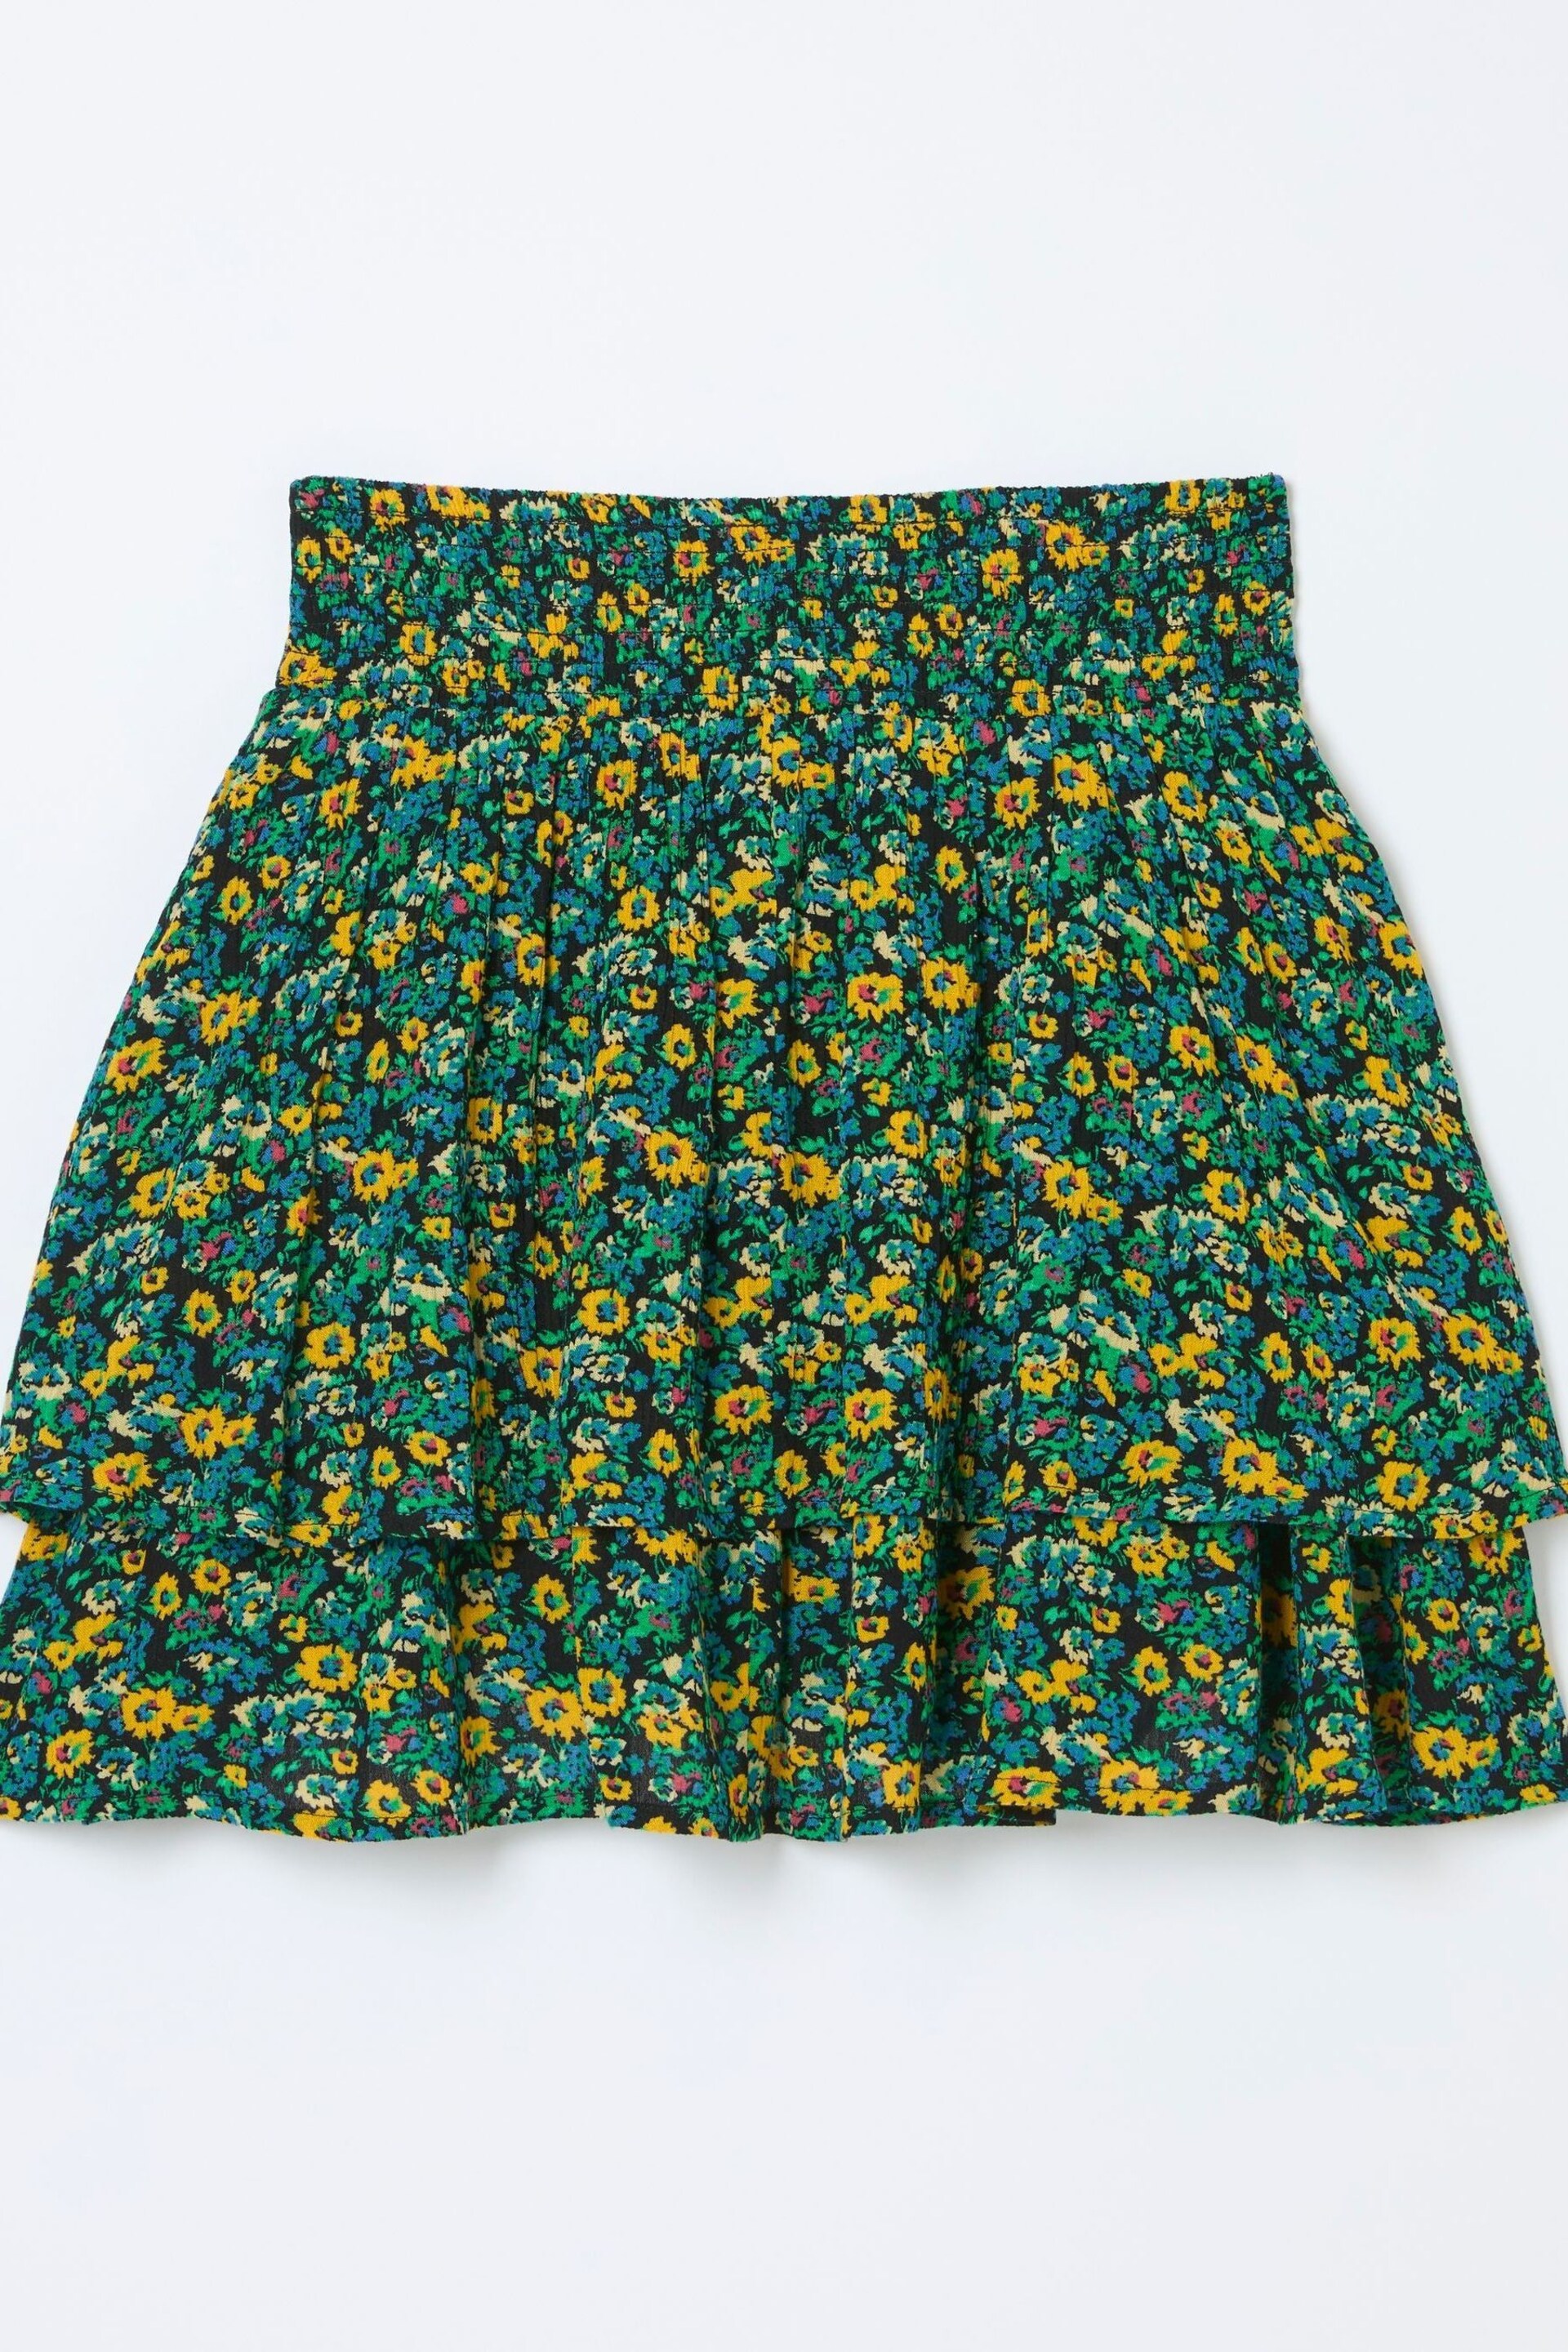 FatFace Green Ali Spring Floral Skirt - Image 5 of 5